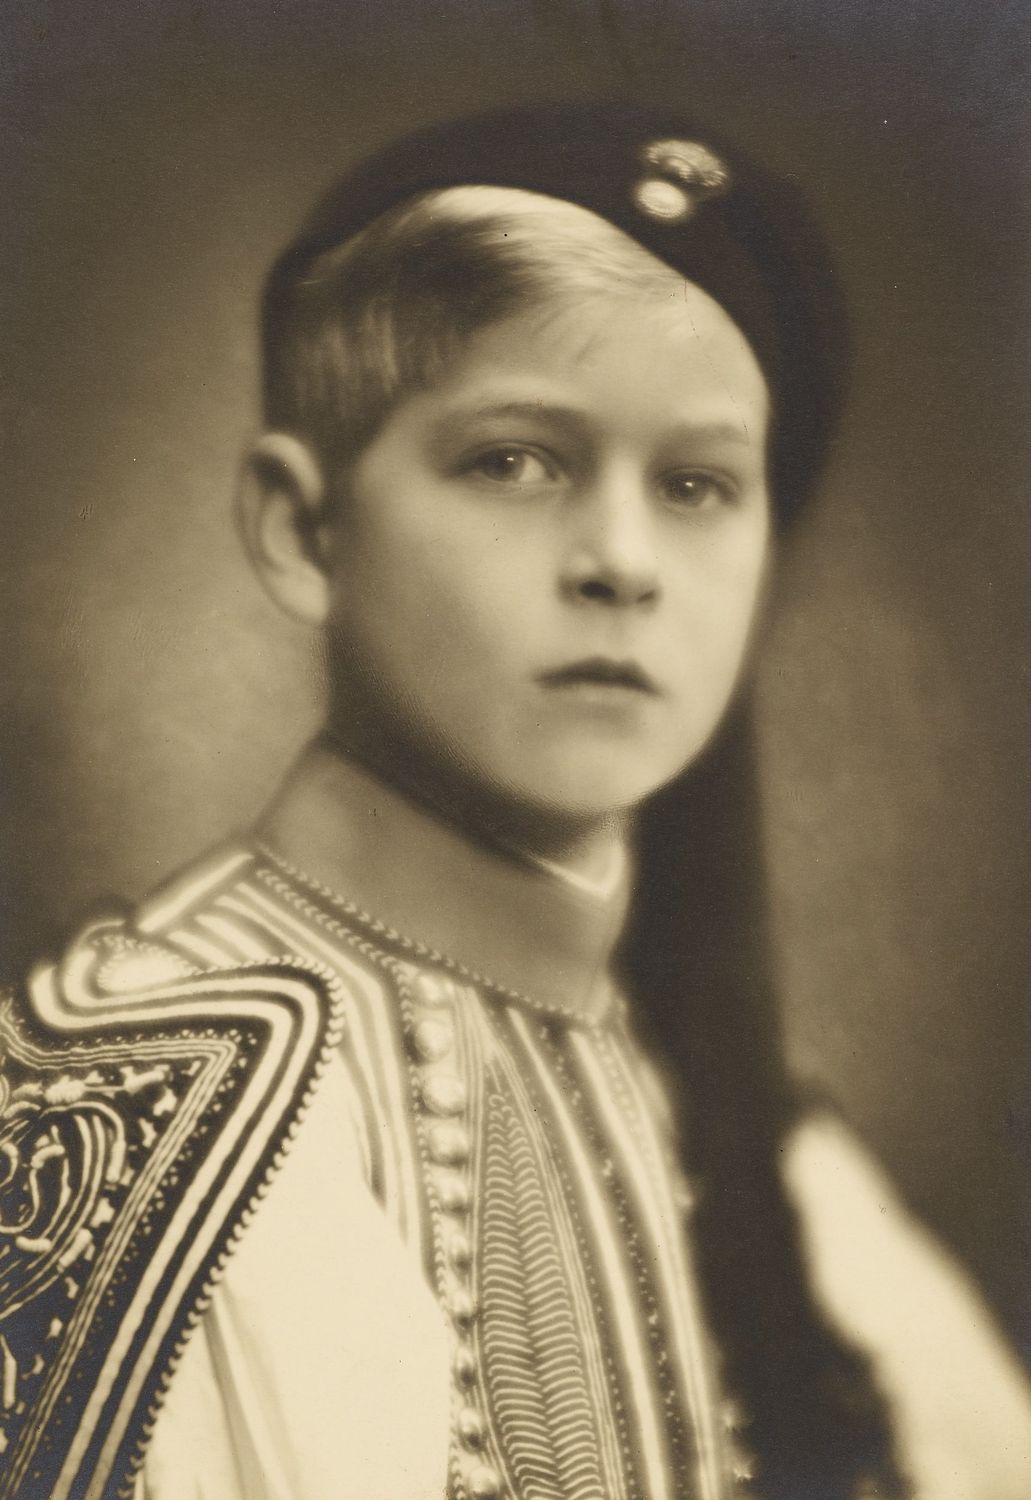 Photograph of a head and shoulders length portrait of Prince Philip of Greece, later HRH The Duke of Edinburgh, facing the viewer. He wears traditional Greek costume and hat.